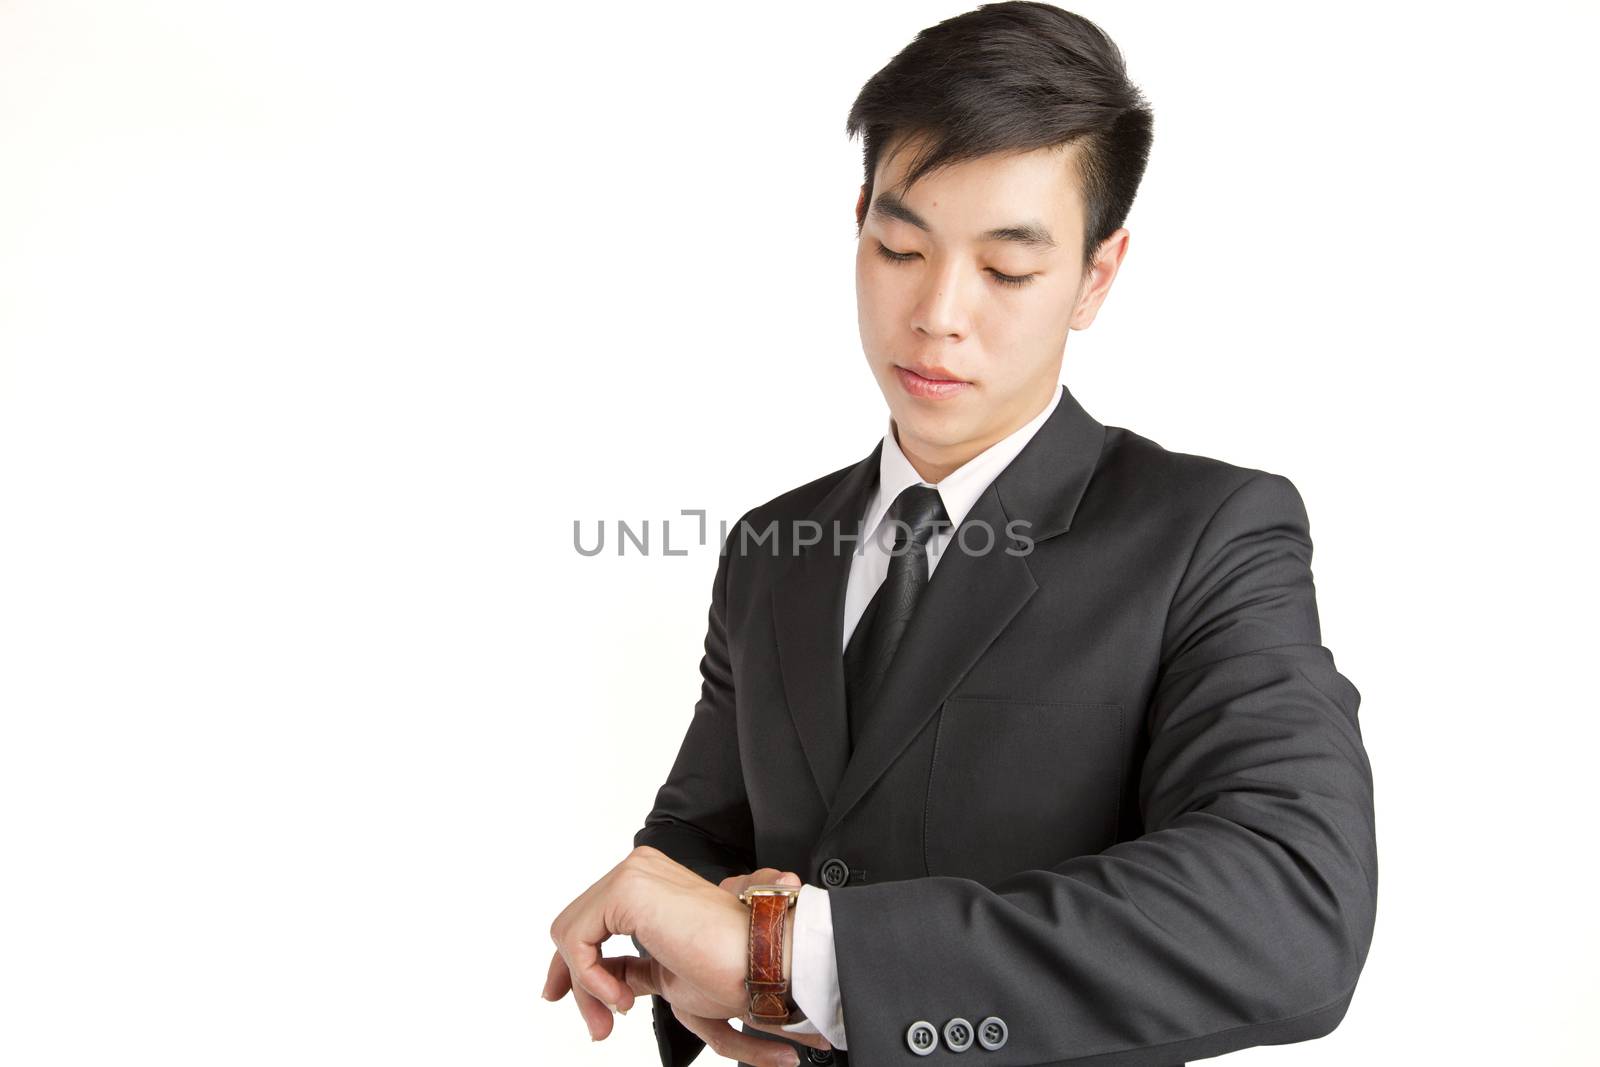 Young Businessman checking the time on his wrist watch : hurry t by jayzynism